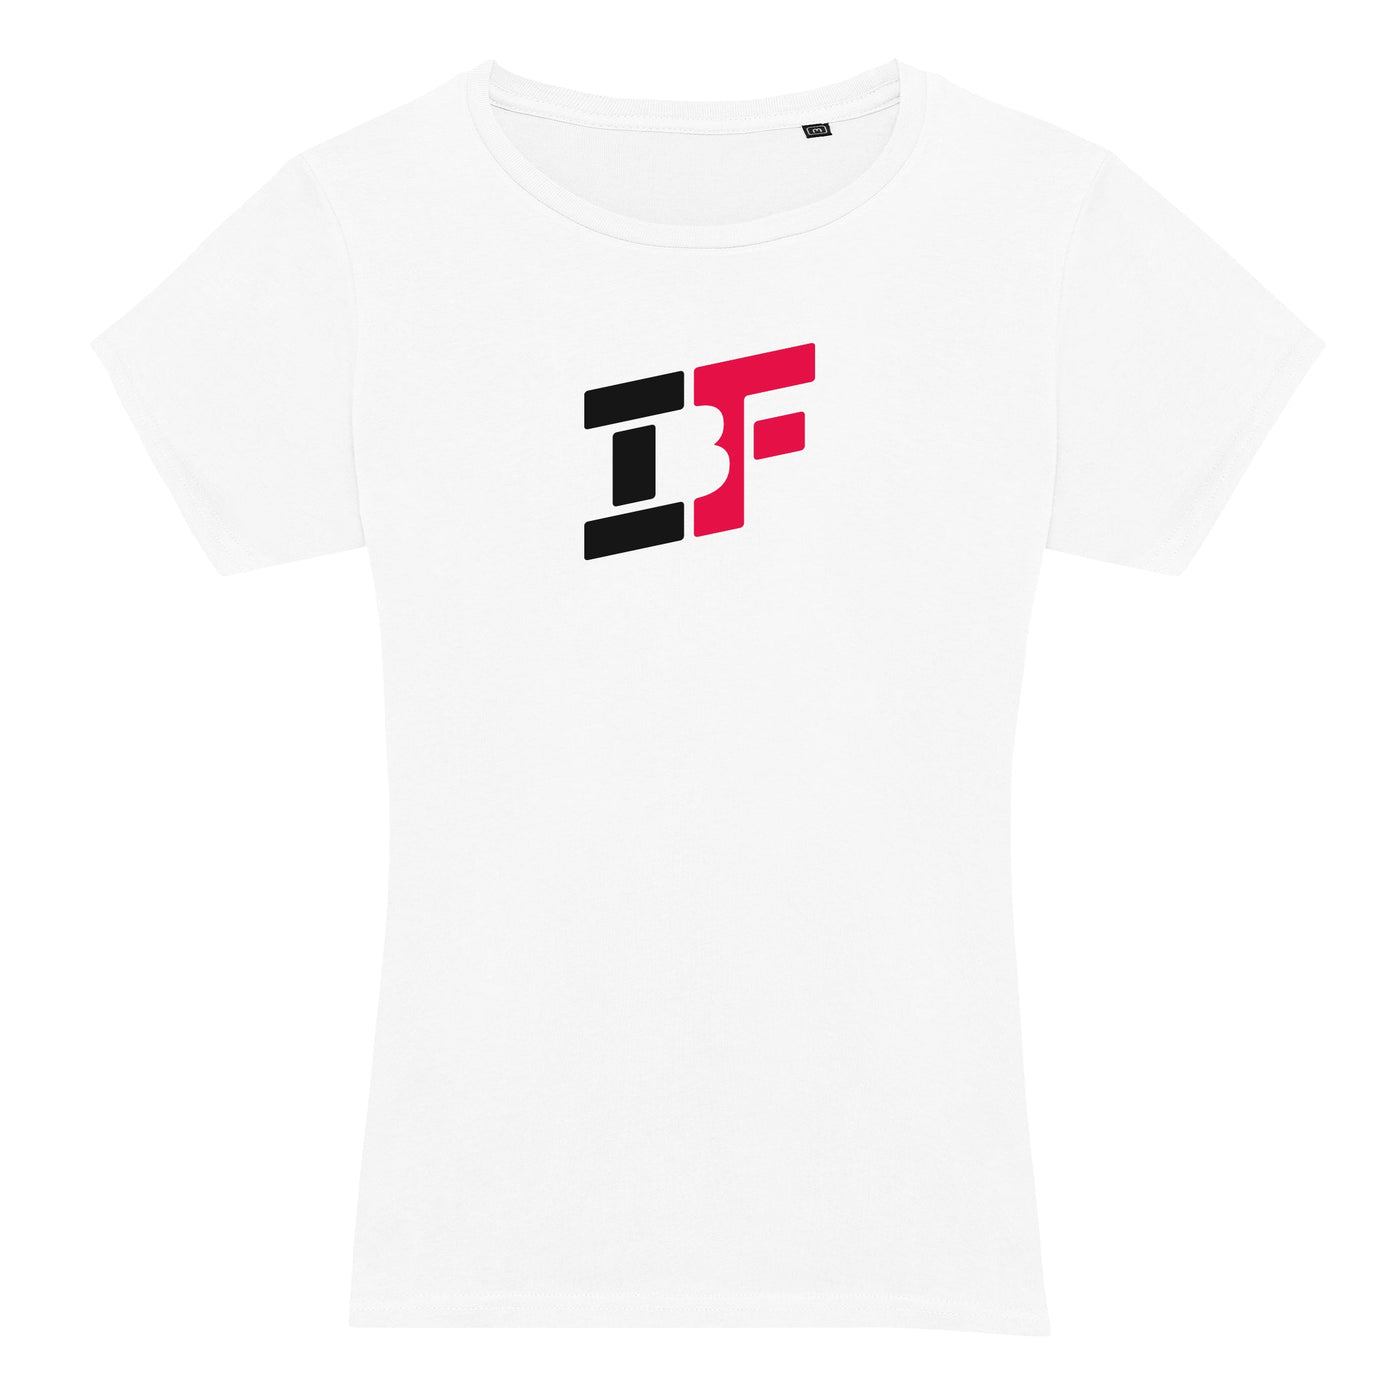 IBF Official Womens T-Shirt